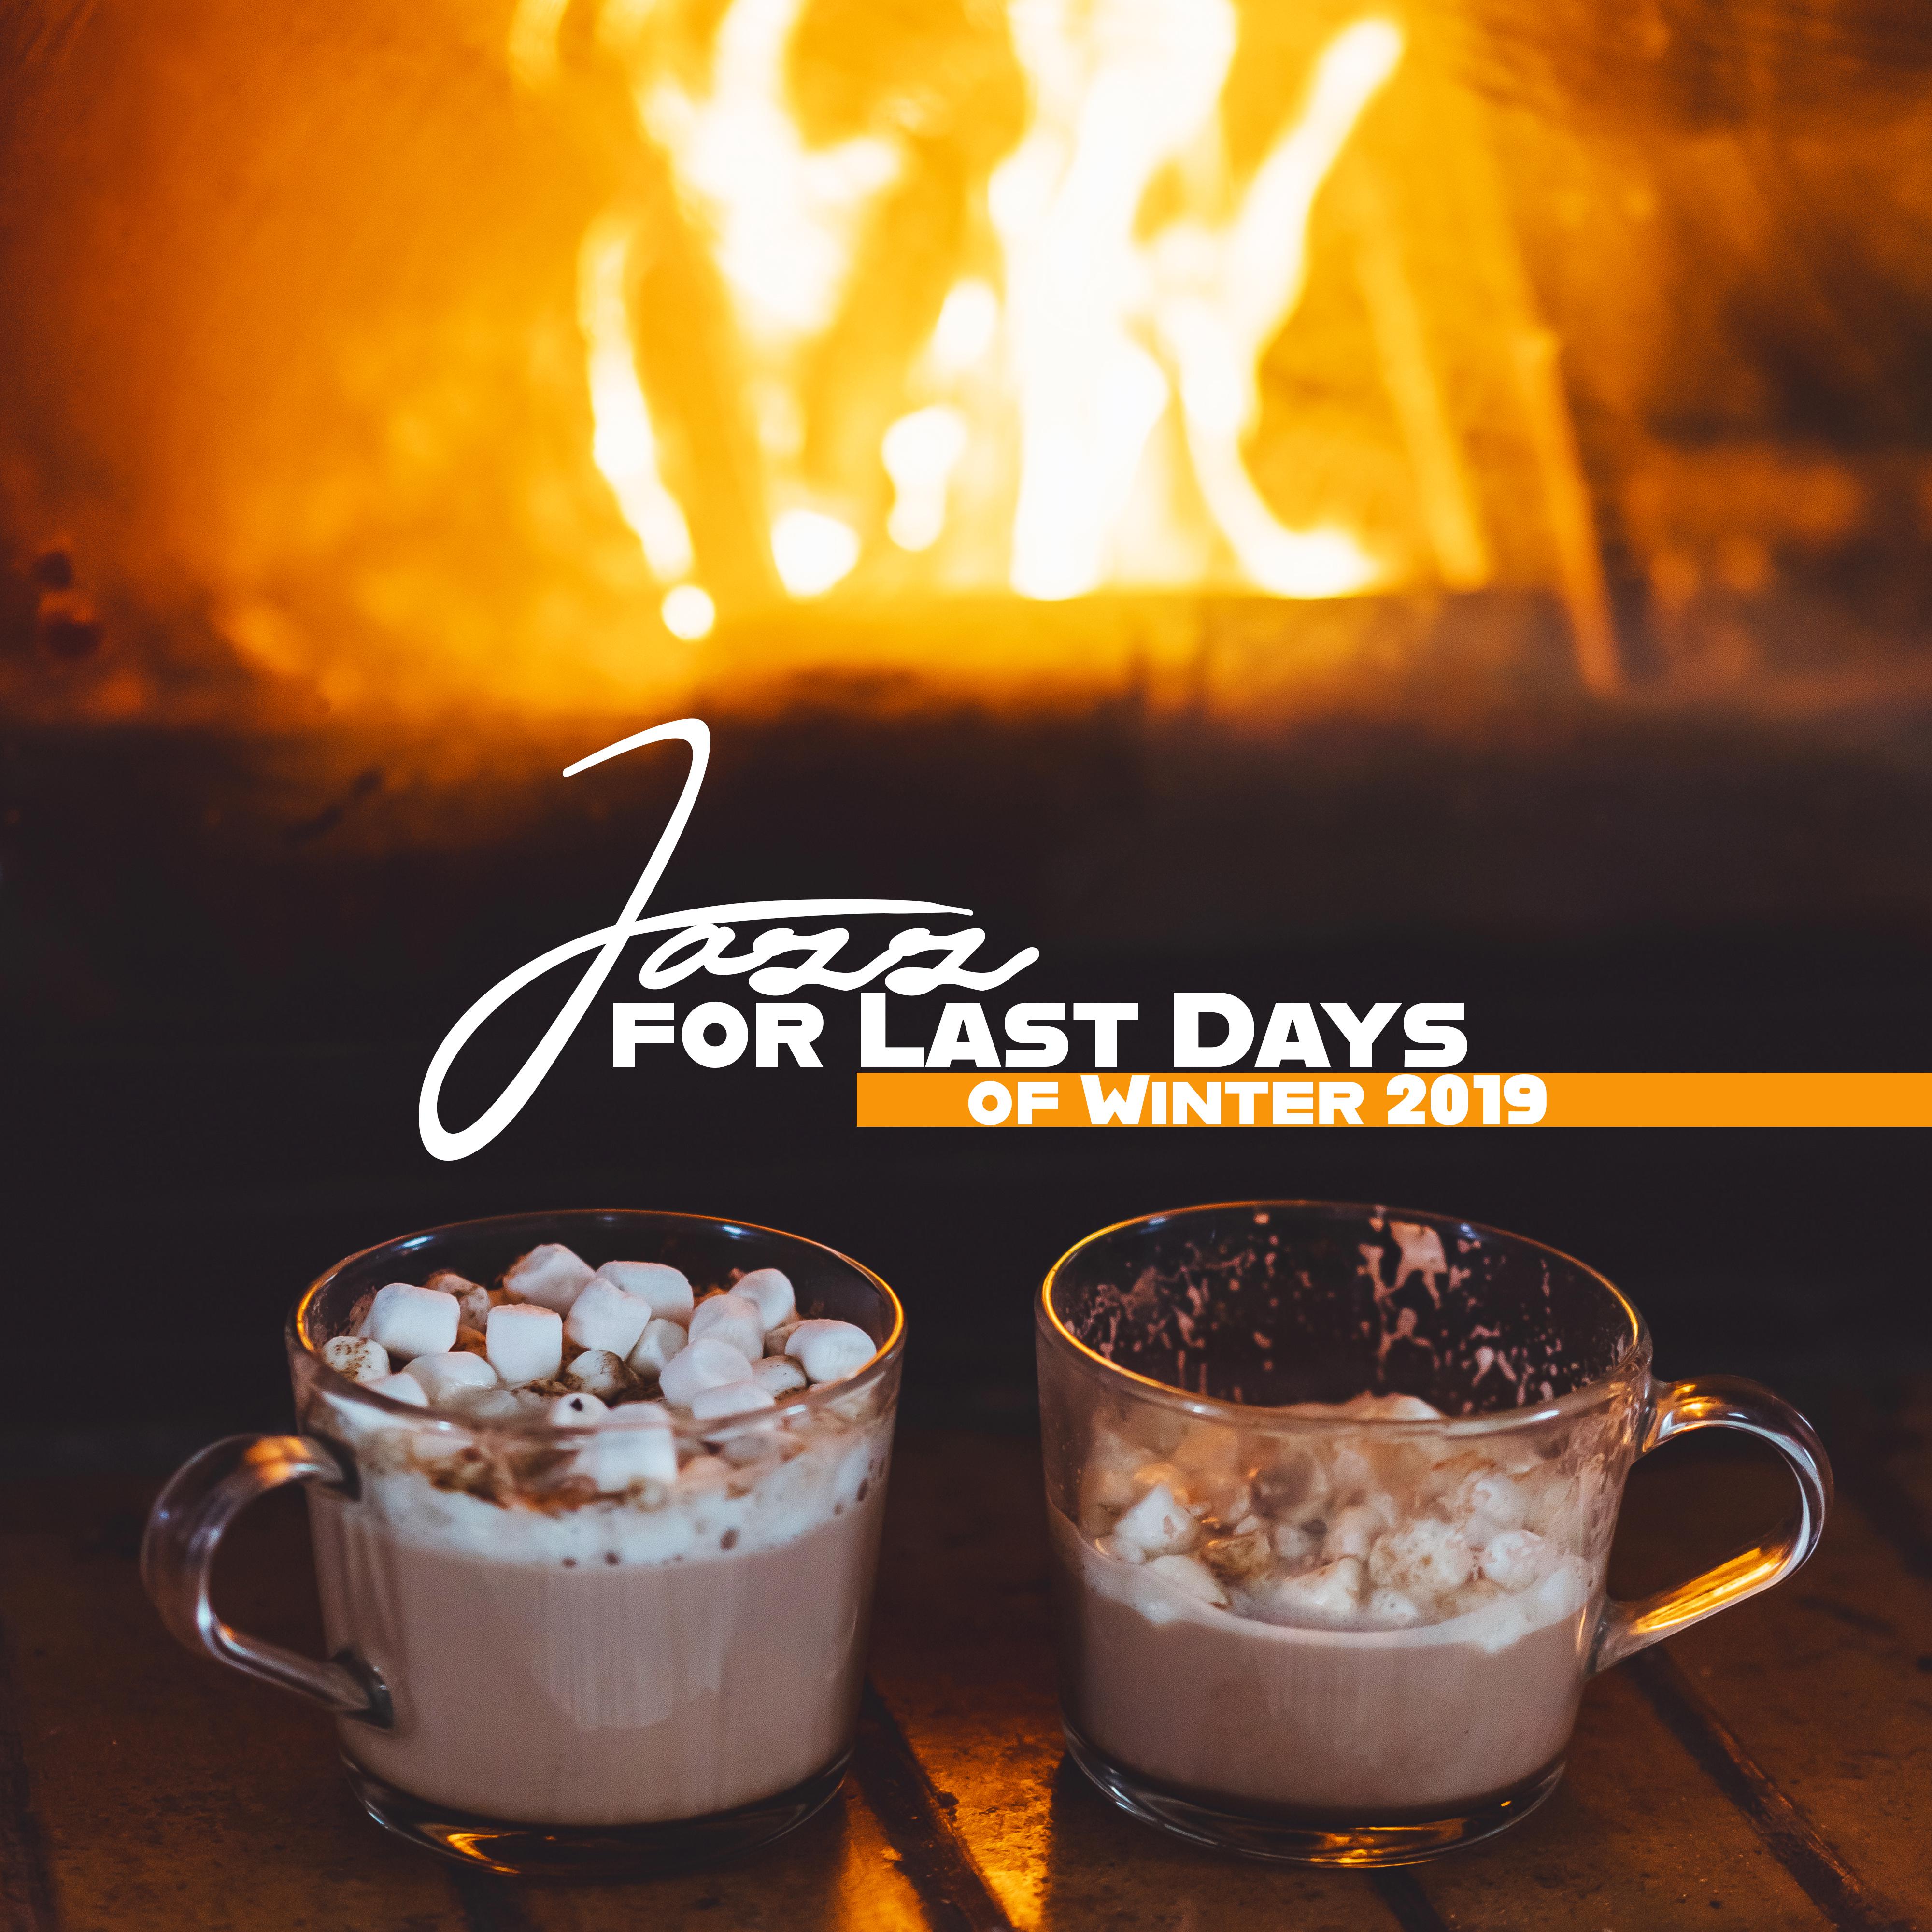 Jazz for Last Days of Winter 2019: Relaxing Instrumental Jazz for Cold Evening by the Fireplace